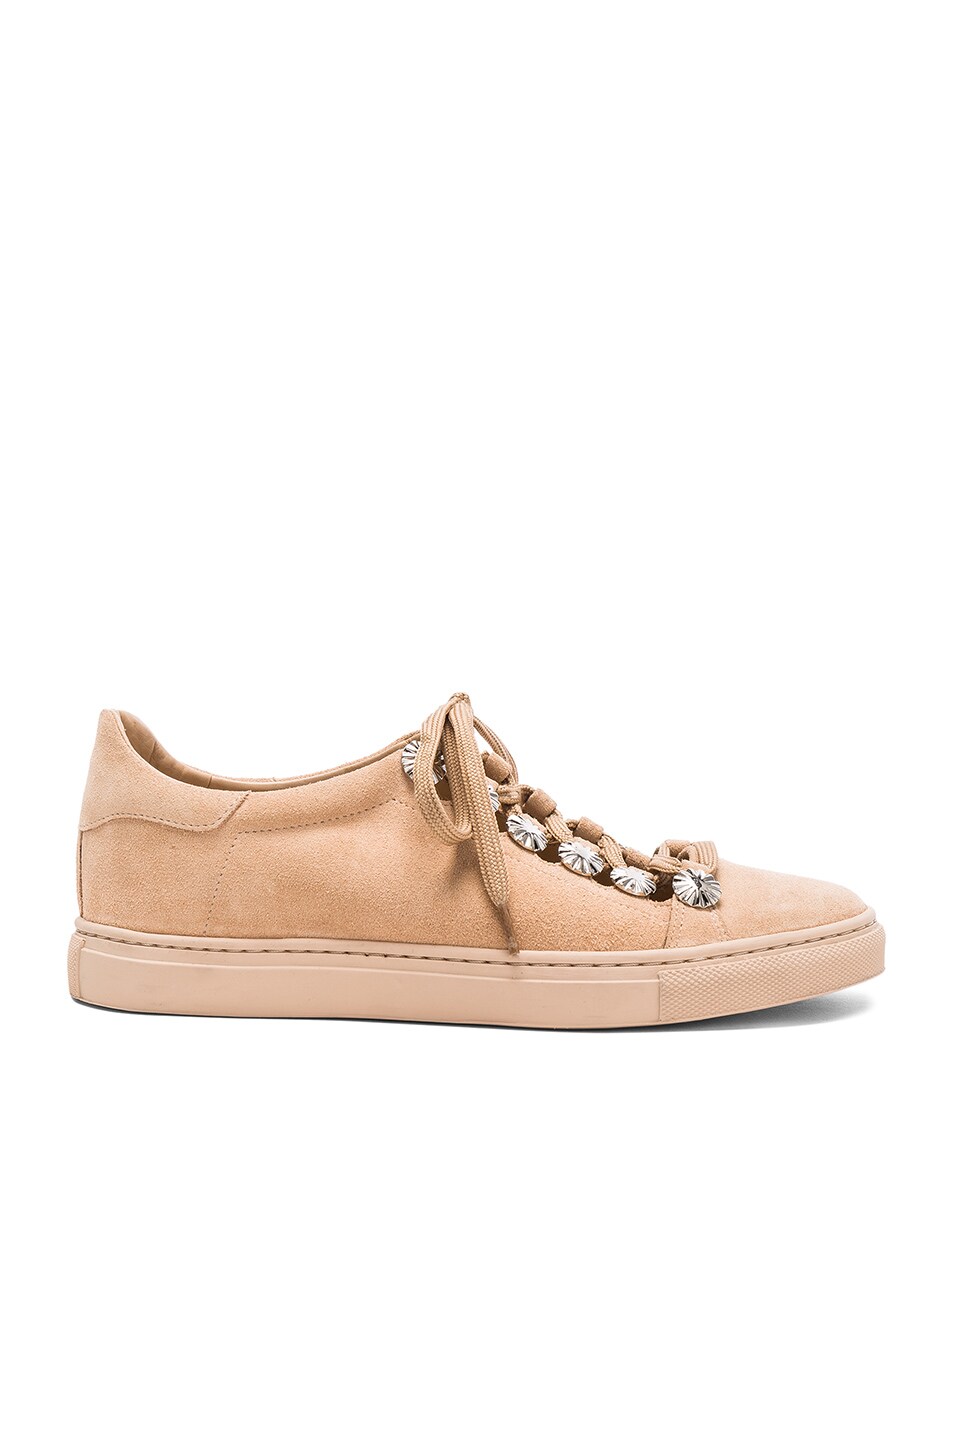 Image 1 of TOGA PULLA Studded Suede Sneakers in Almond Suede